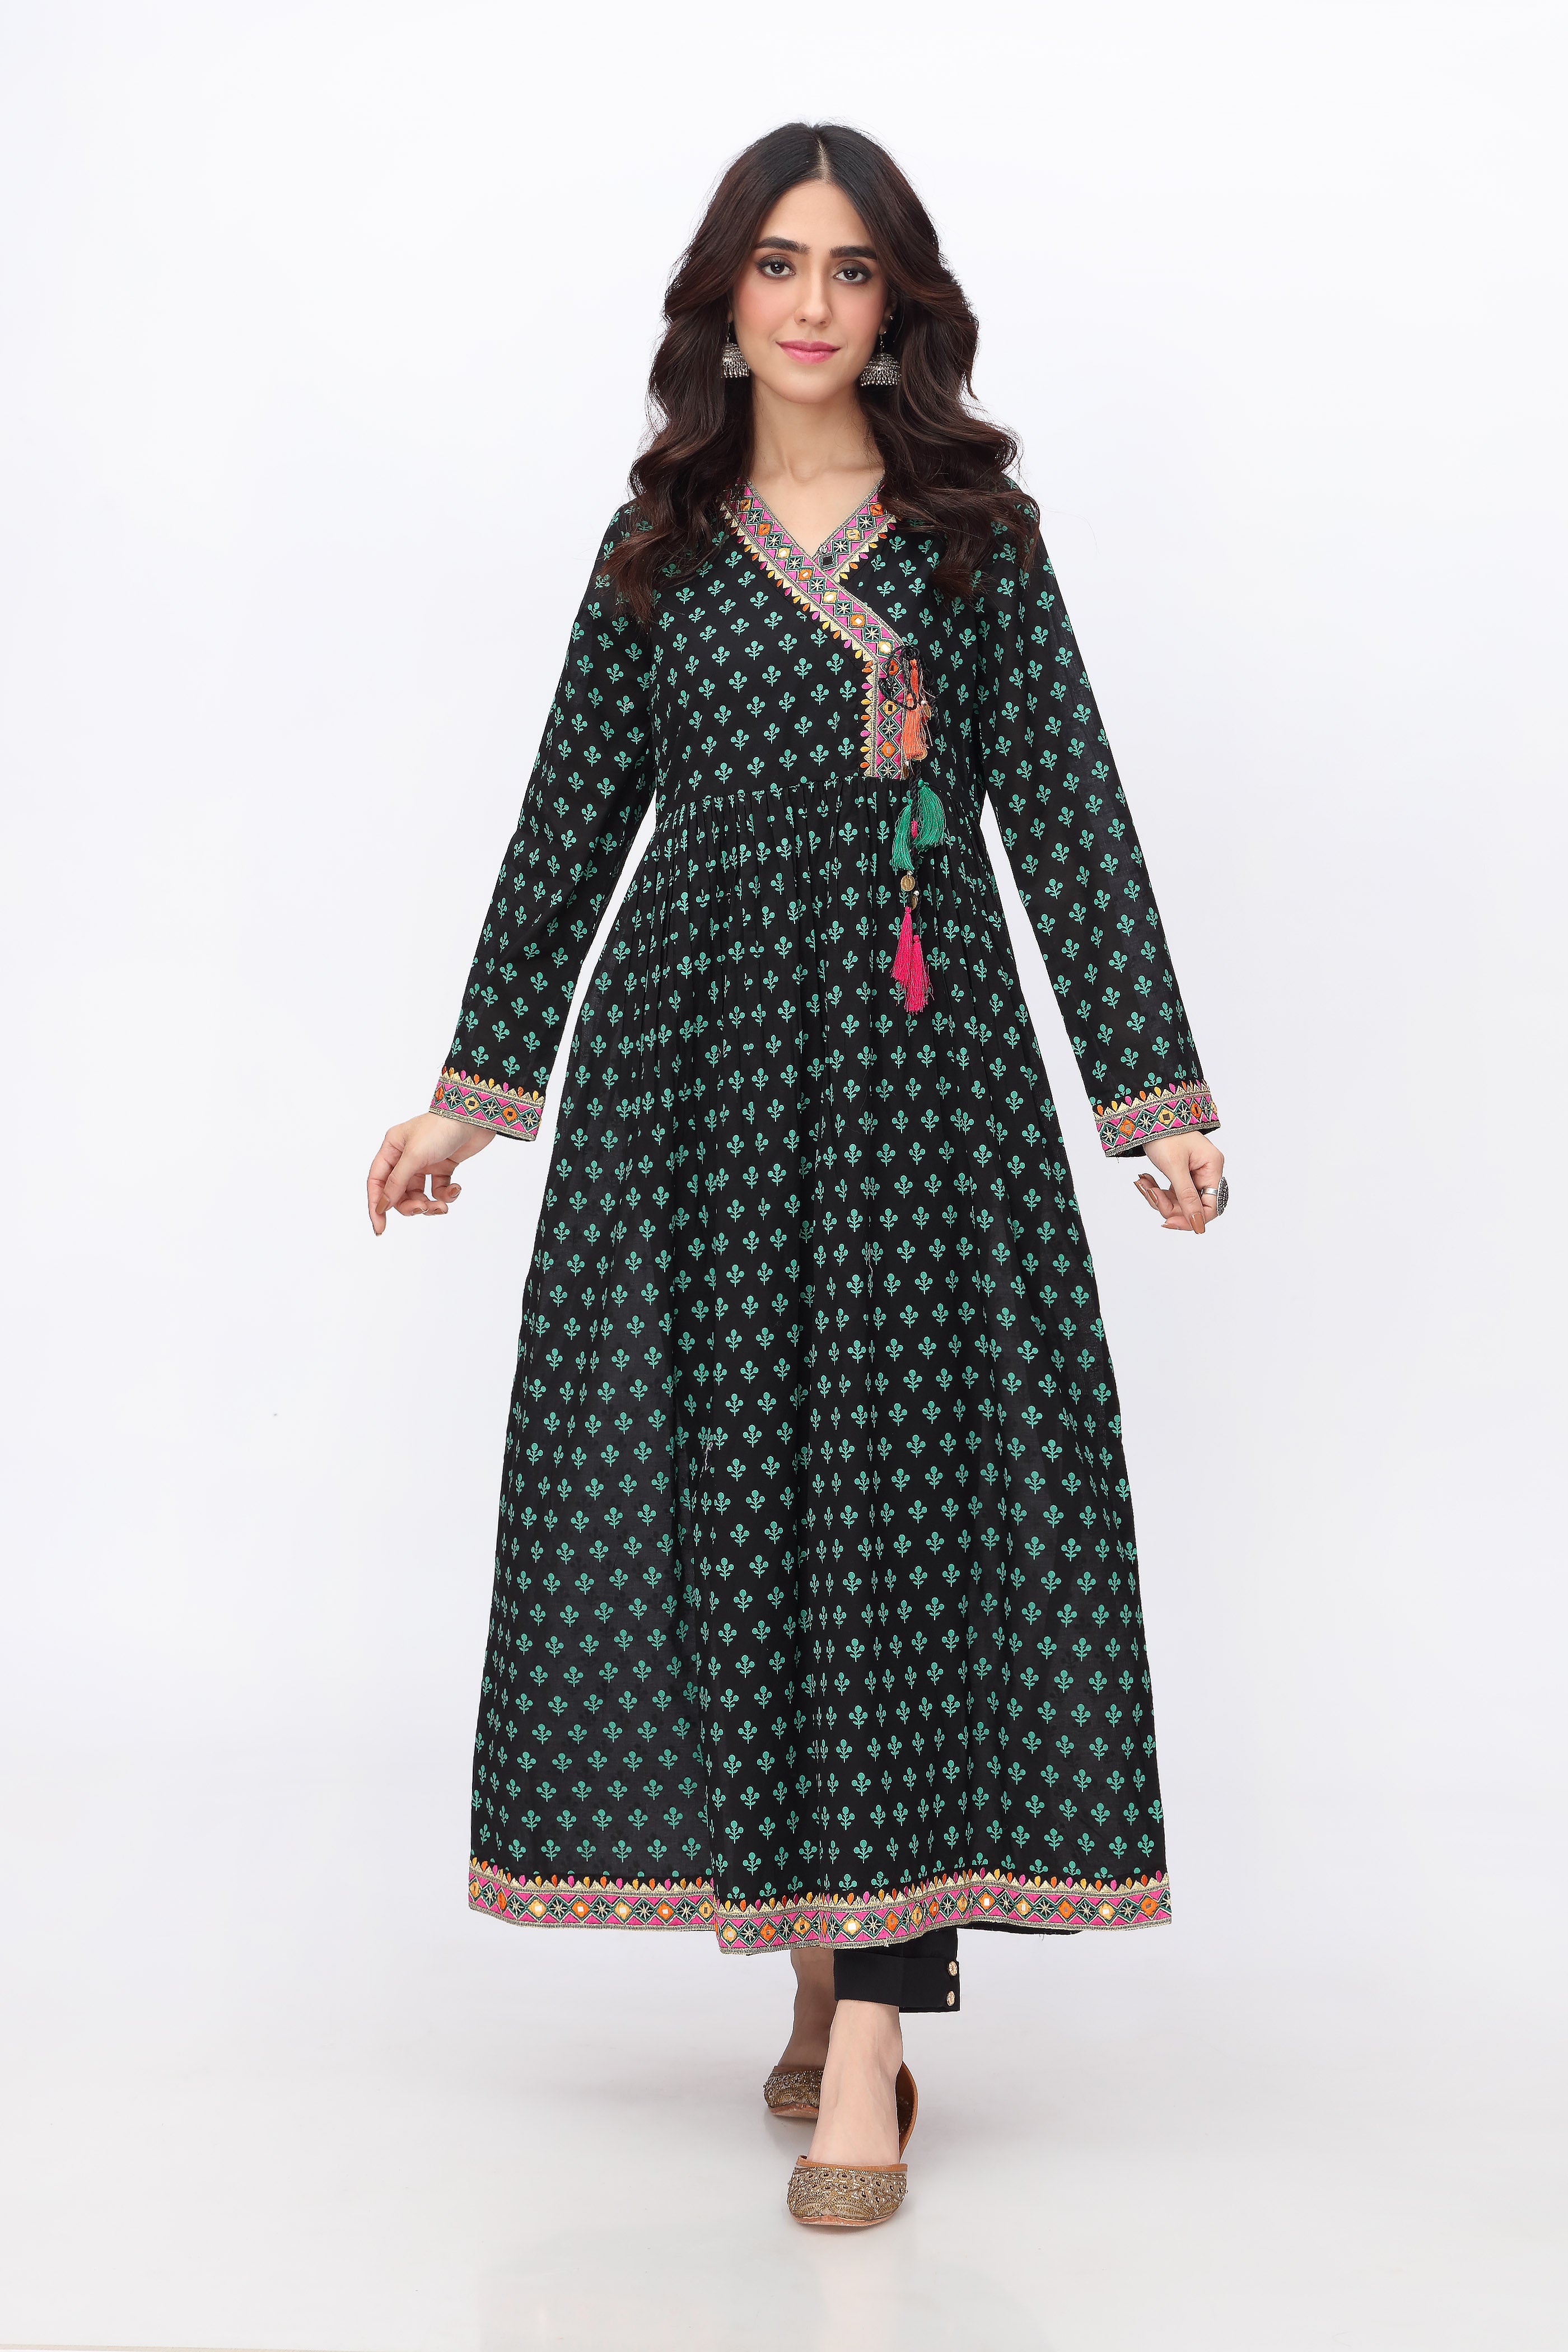 Black Frock in Black coloured Printed Lawn fabric